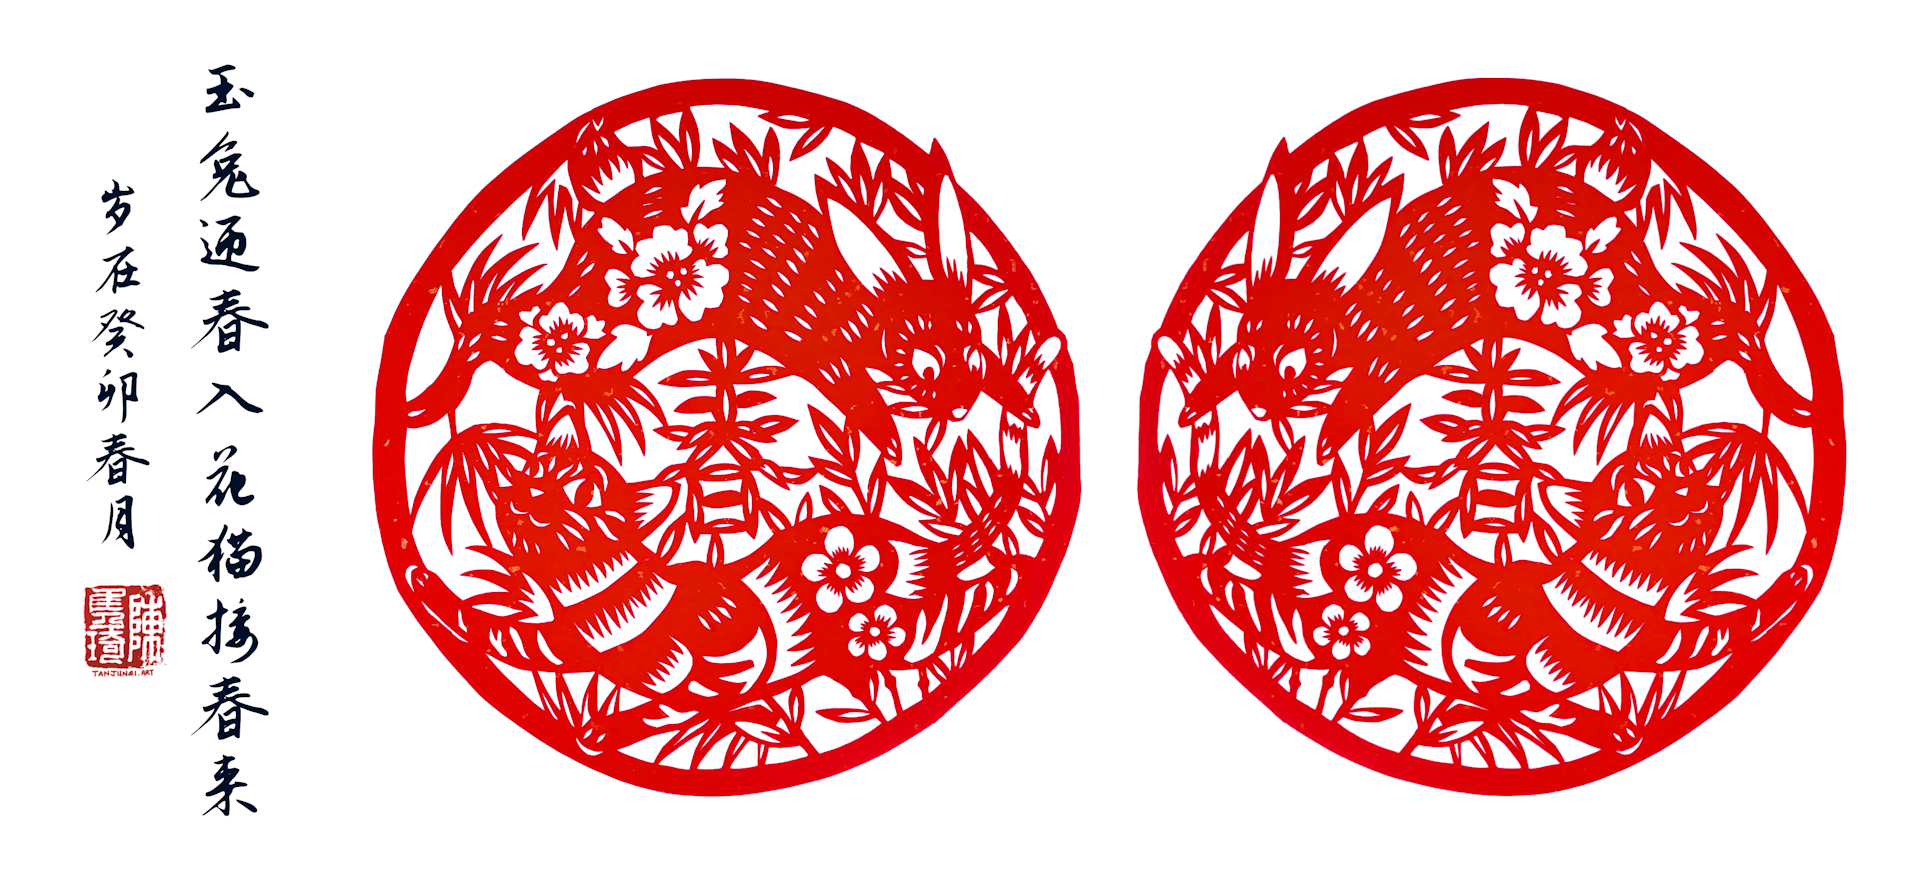 Pair of Chinese papercuts showing a rabbit bounding over a tabby cat, within a circular frame, with the Chinese character for 'Spring' in the center, amidst lush bamboo and palm foliage